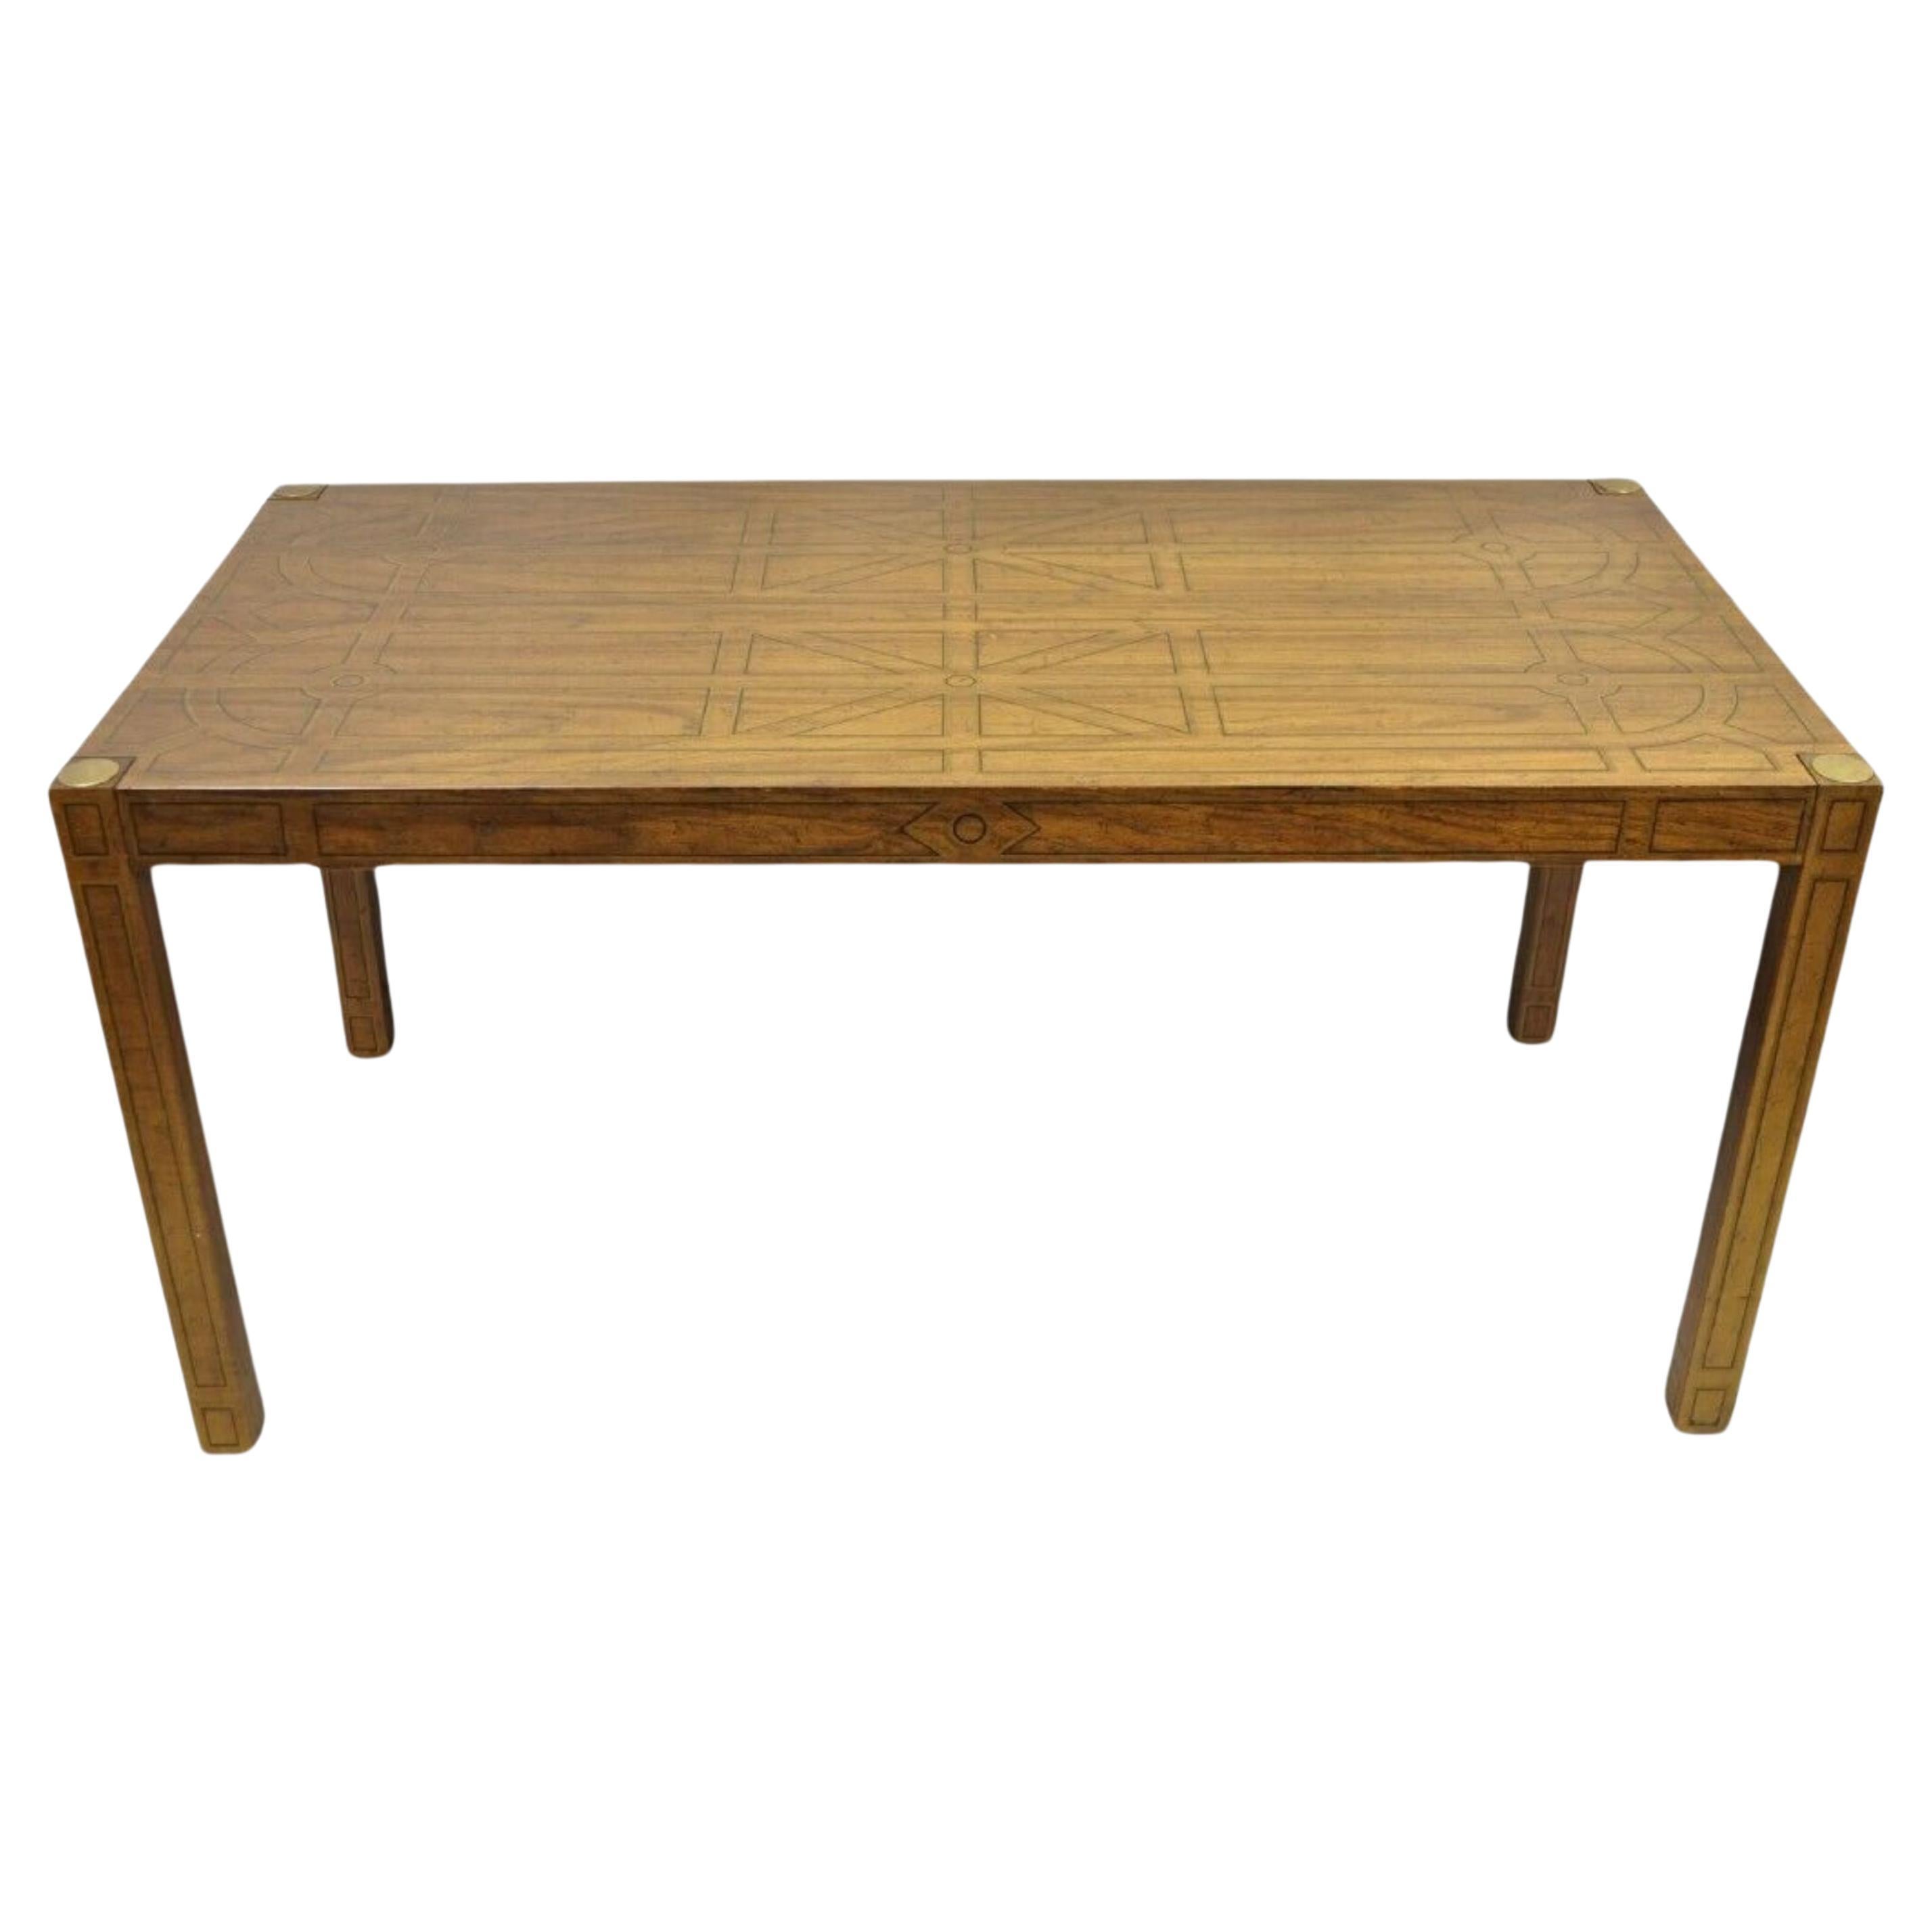 Drexel Oxford Square Geometric Painted Parsons Style Console Desk Dining Table For Sale